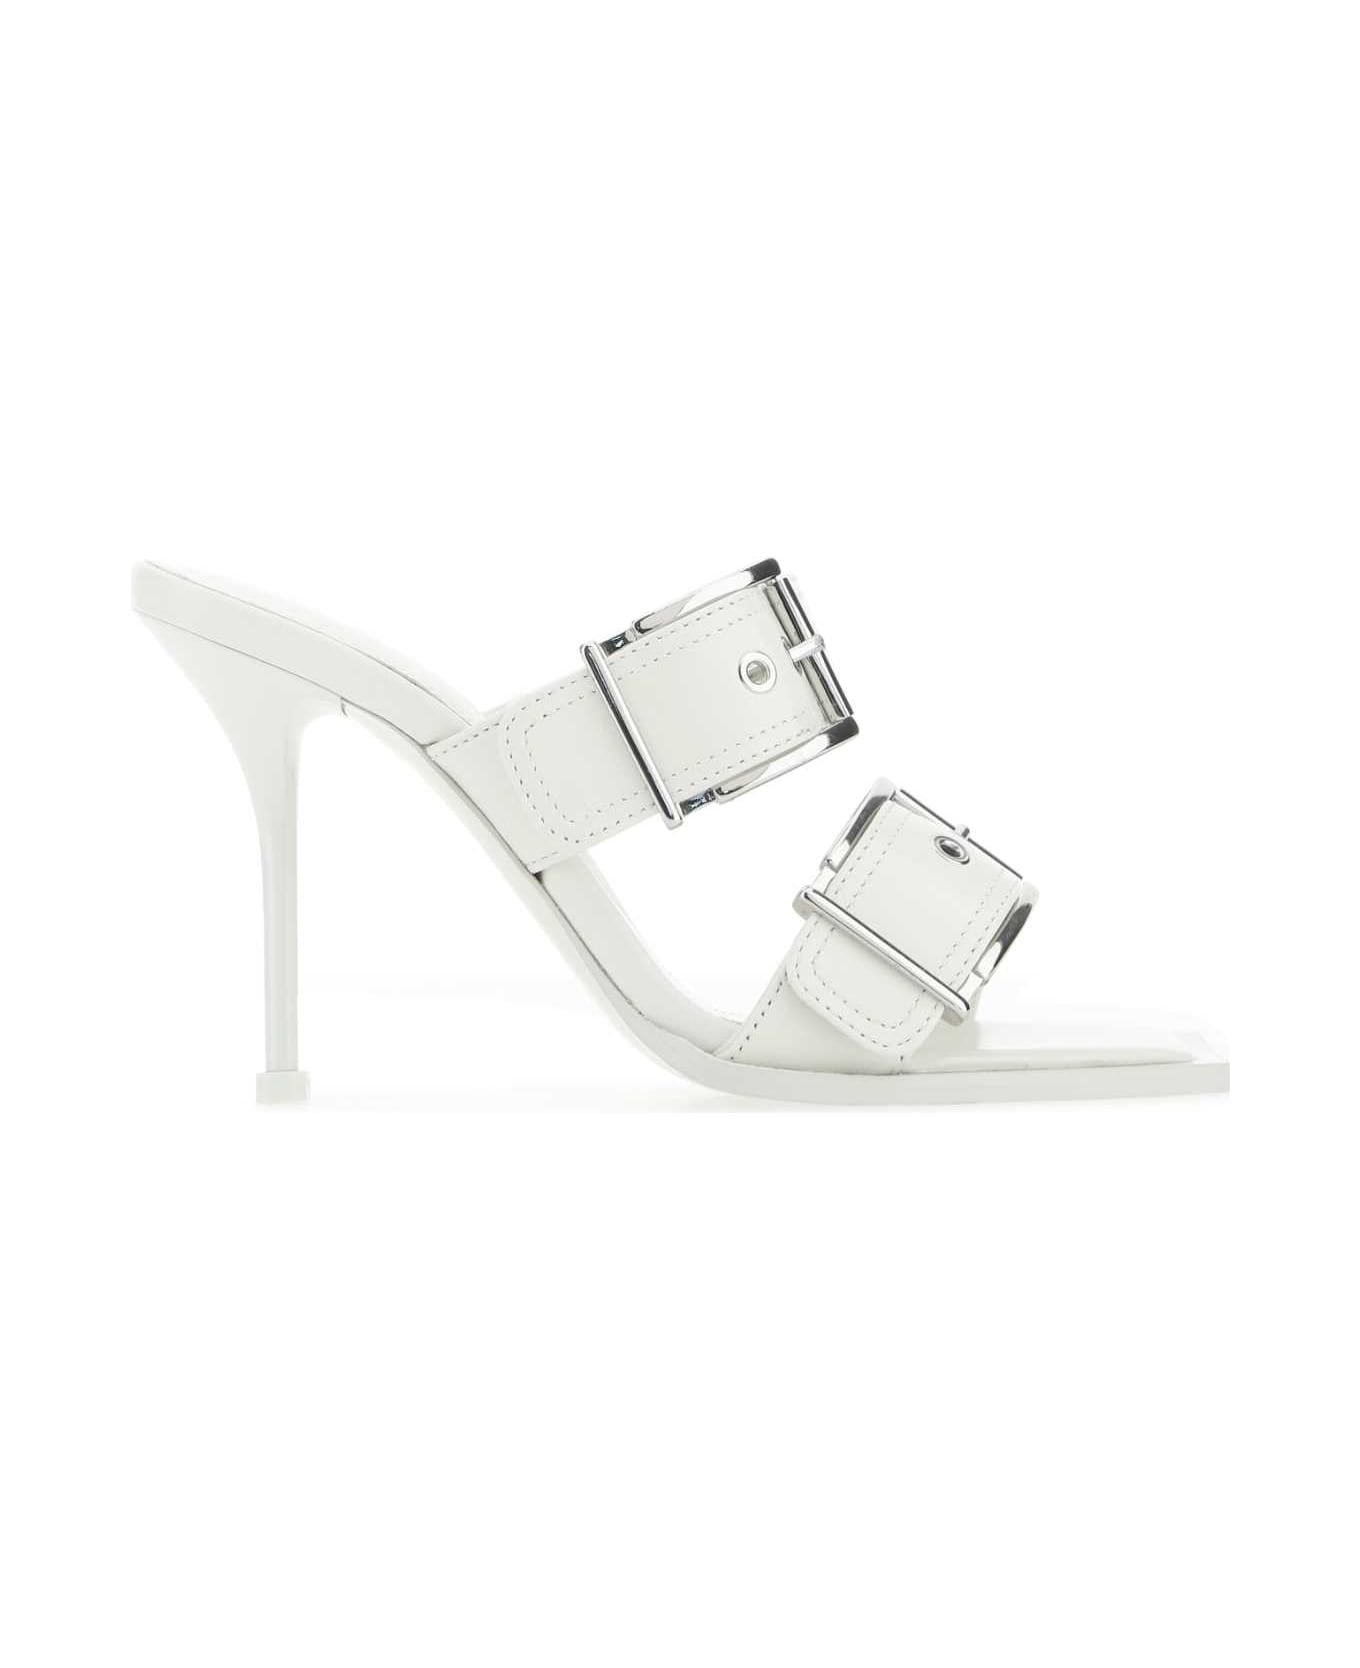 Alexander McQueen White Leather Mules - 9359 サンダル